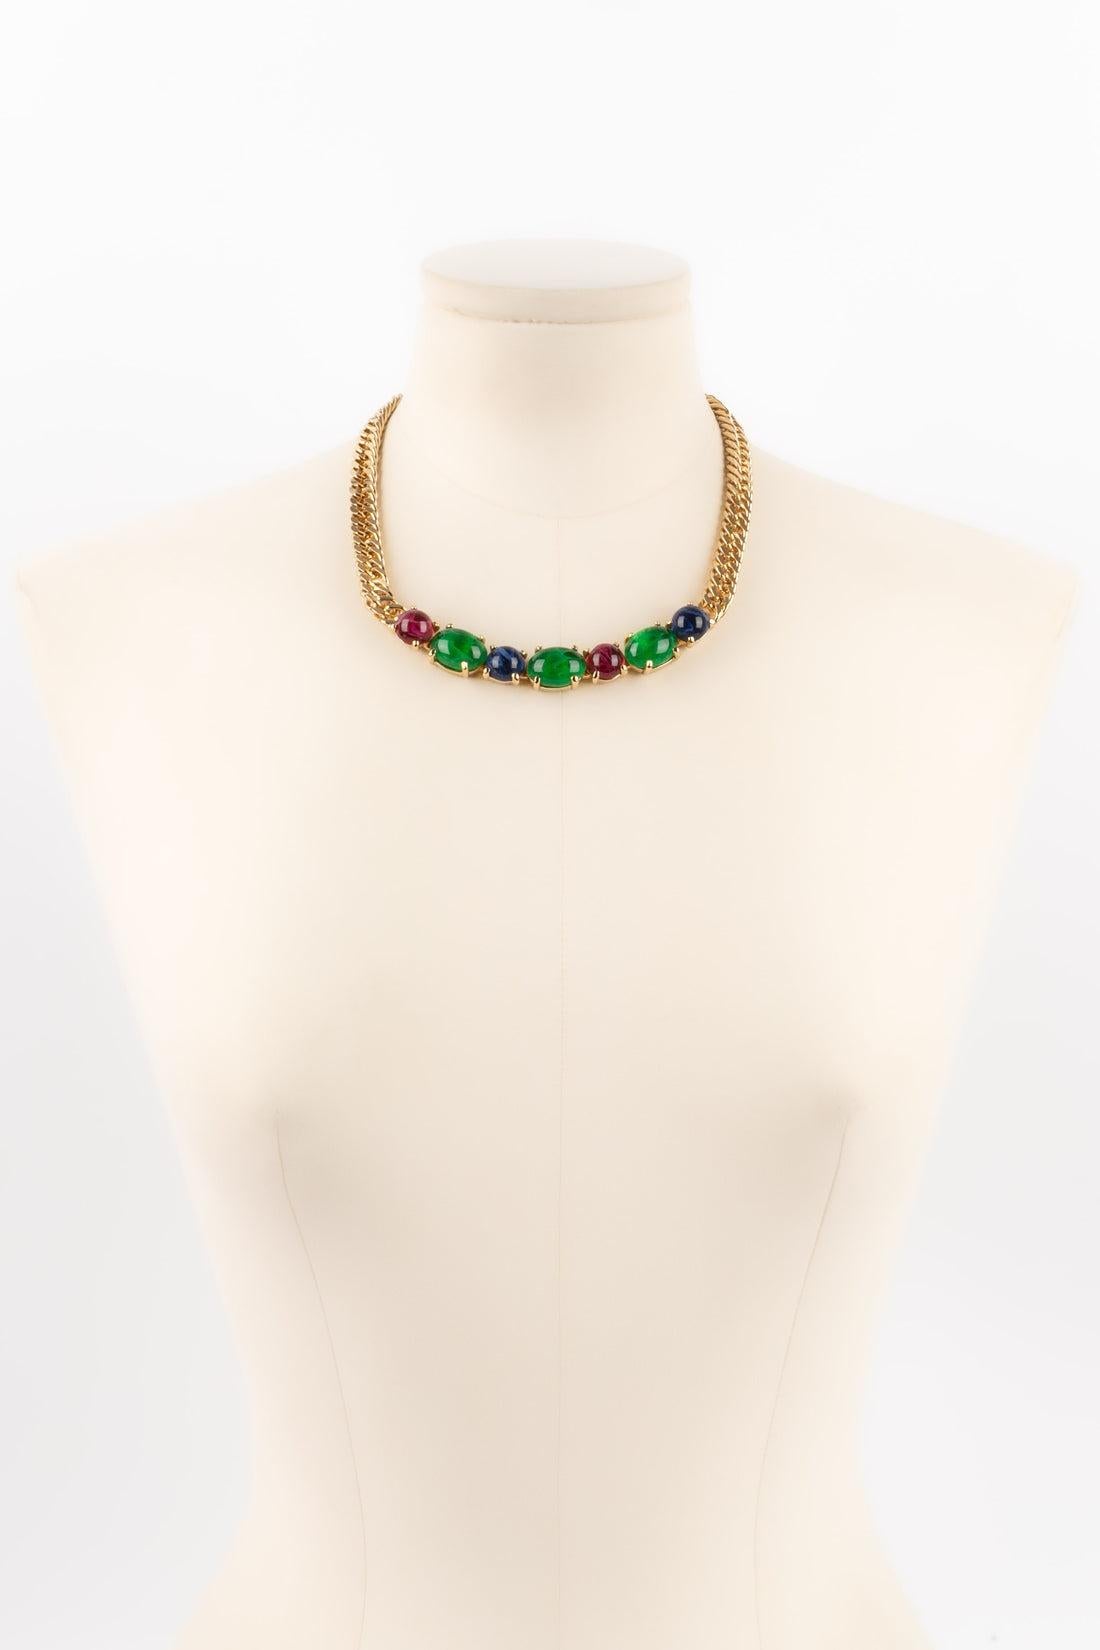 Dior - (Made in Germany) Short necklace in gold-plated metal with colored resin.

Additional information:
Condition: Very good condition
Dimensions: Length: from 43 cm to 48 cm

Seller Reference: BC13